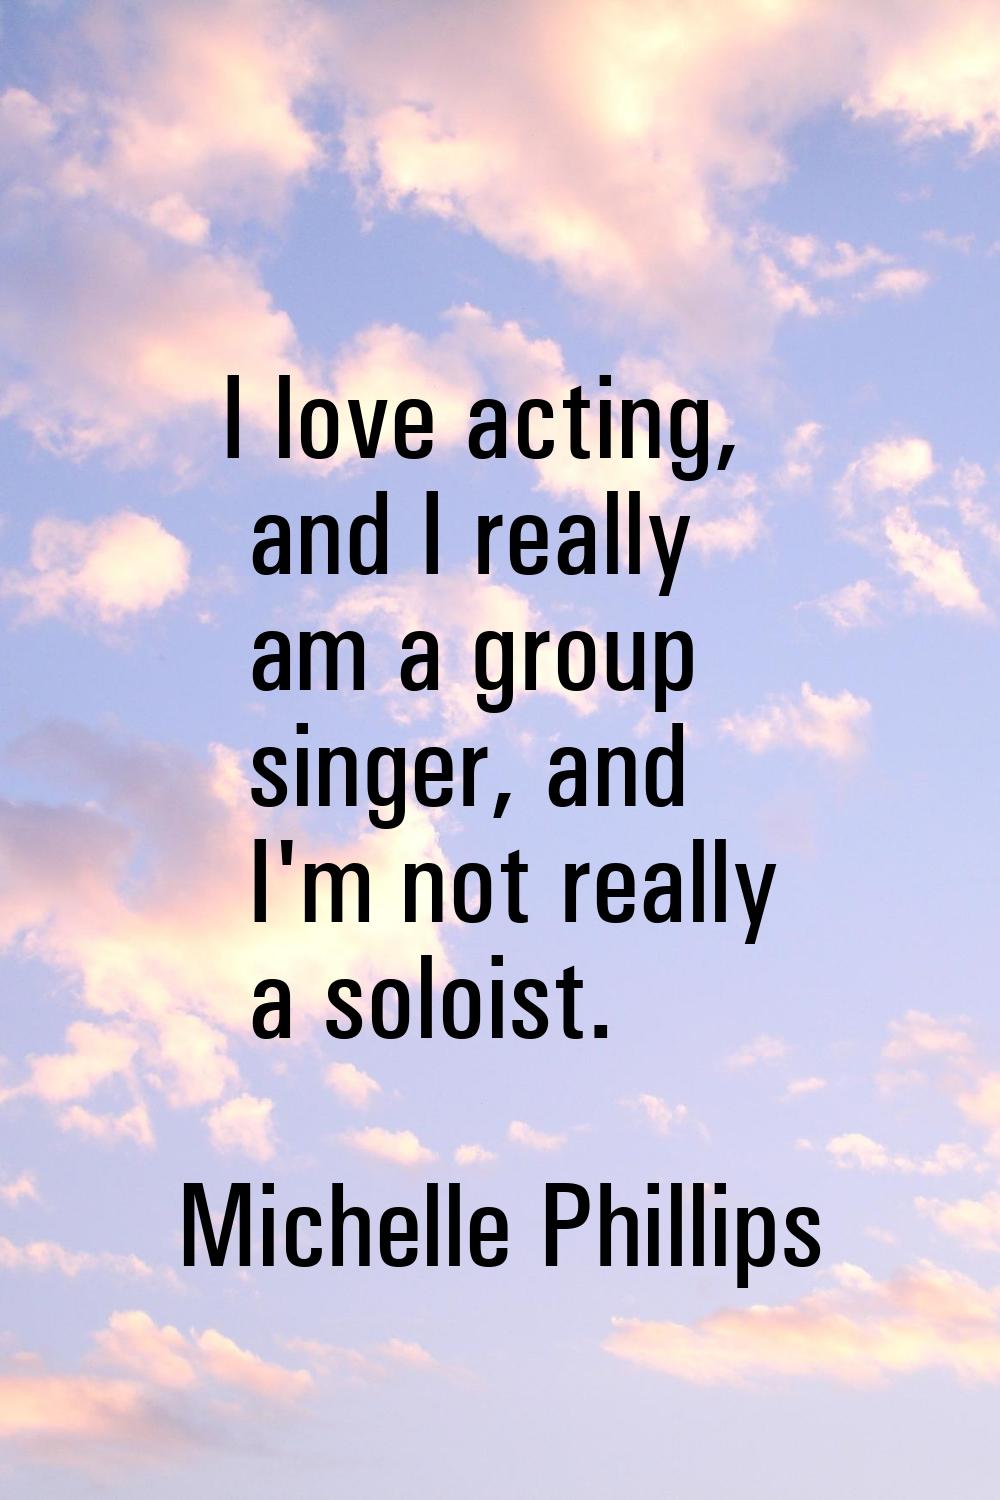 I love acting, and I really am a group singer, and I'm not really a soloist.